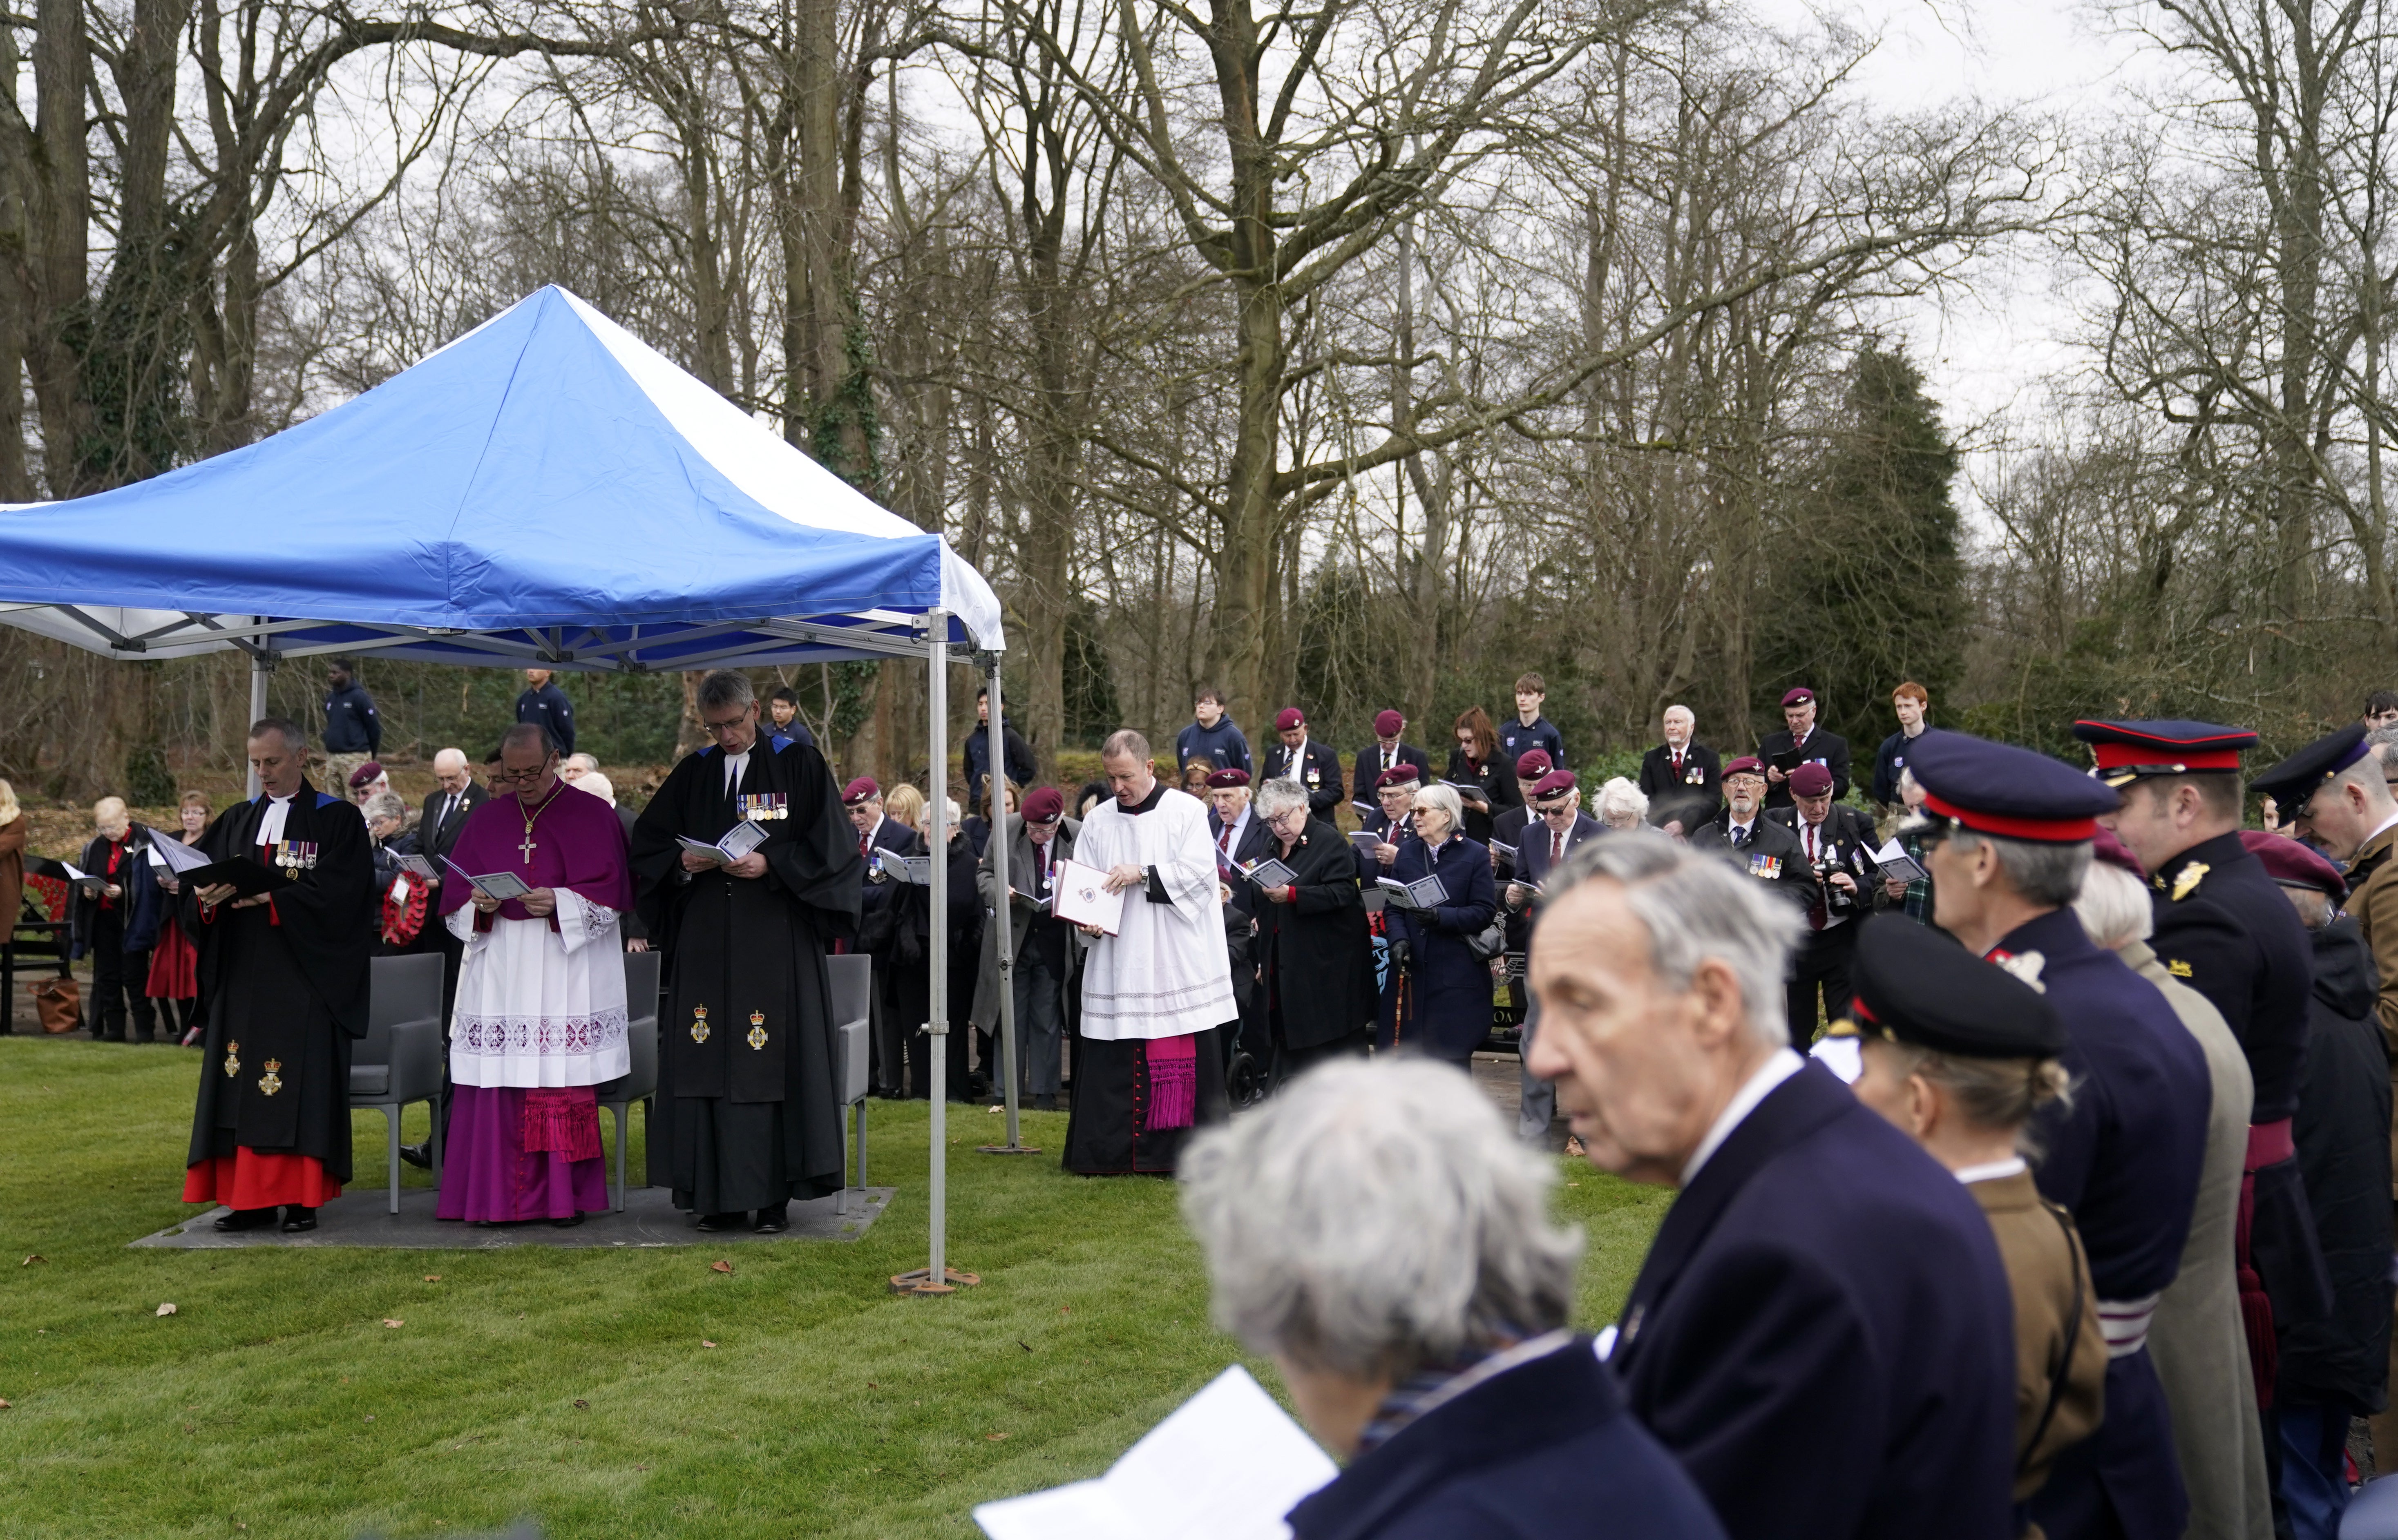 Veterans and family members take part in the dedication service (Andrew Matthews/PA)